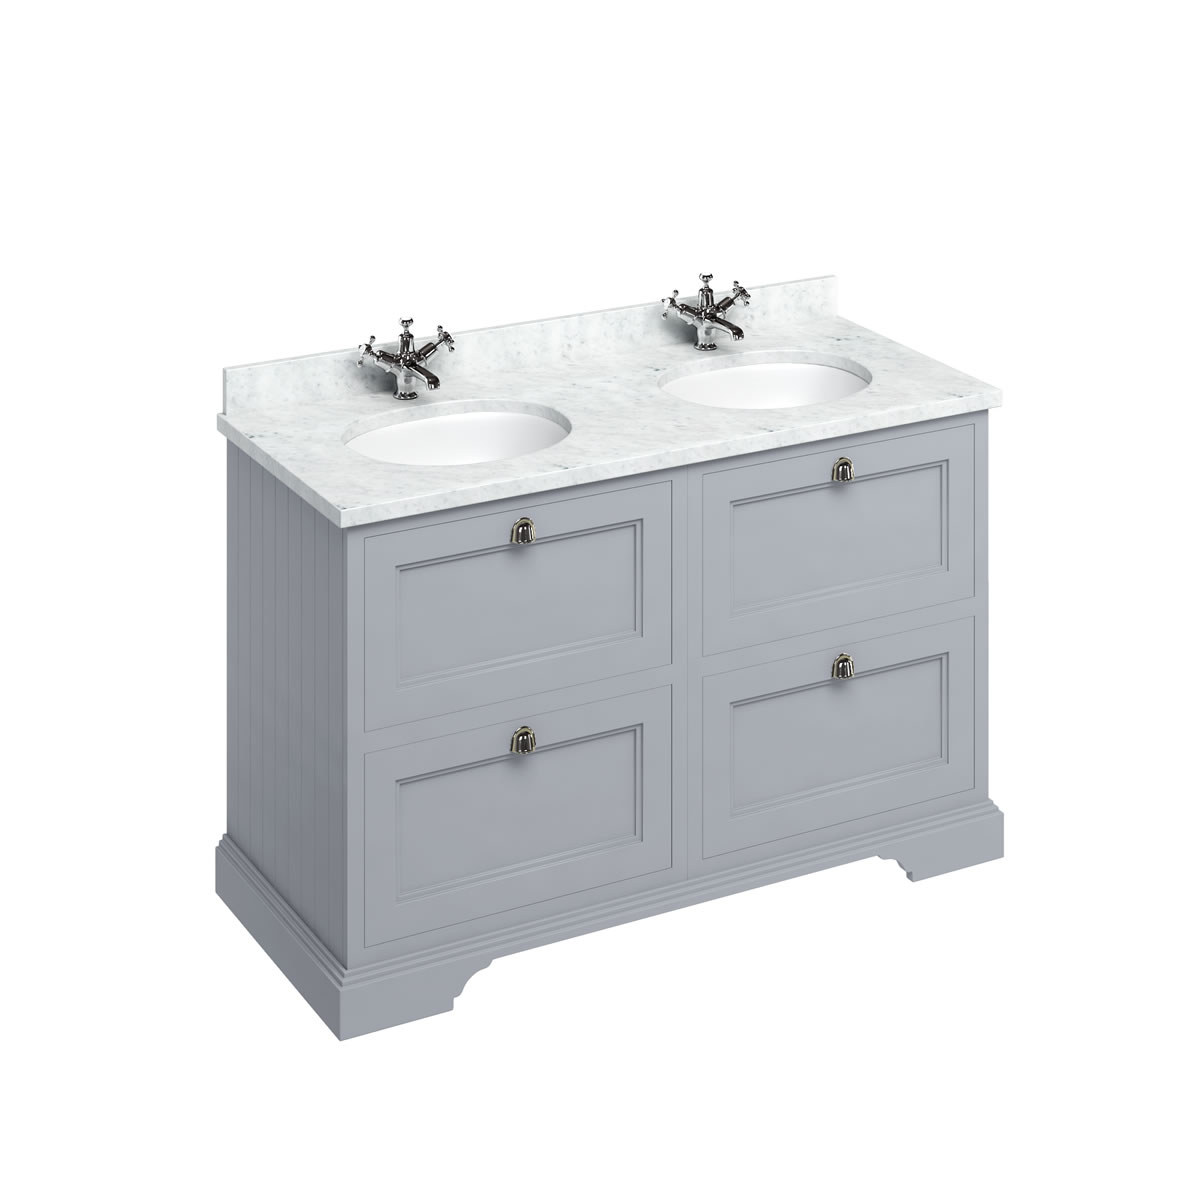 Freestanding 130 Vanity Unit with drawers - Classic Grey and Minerva Carrara white worktop with two integrated white basins 